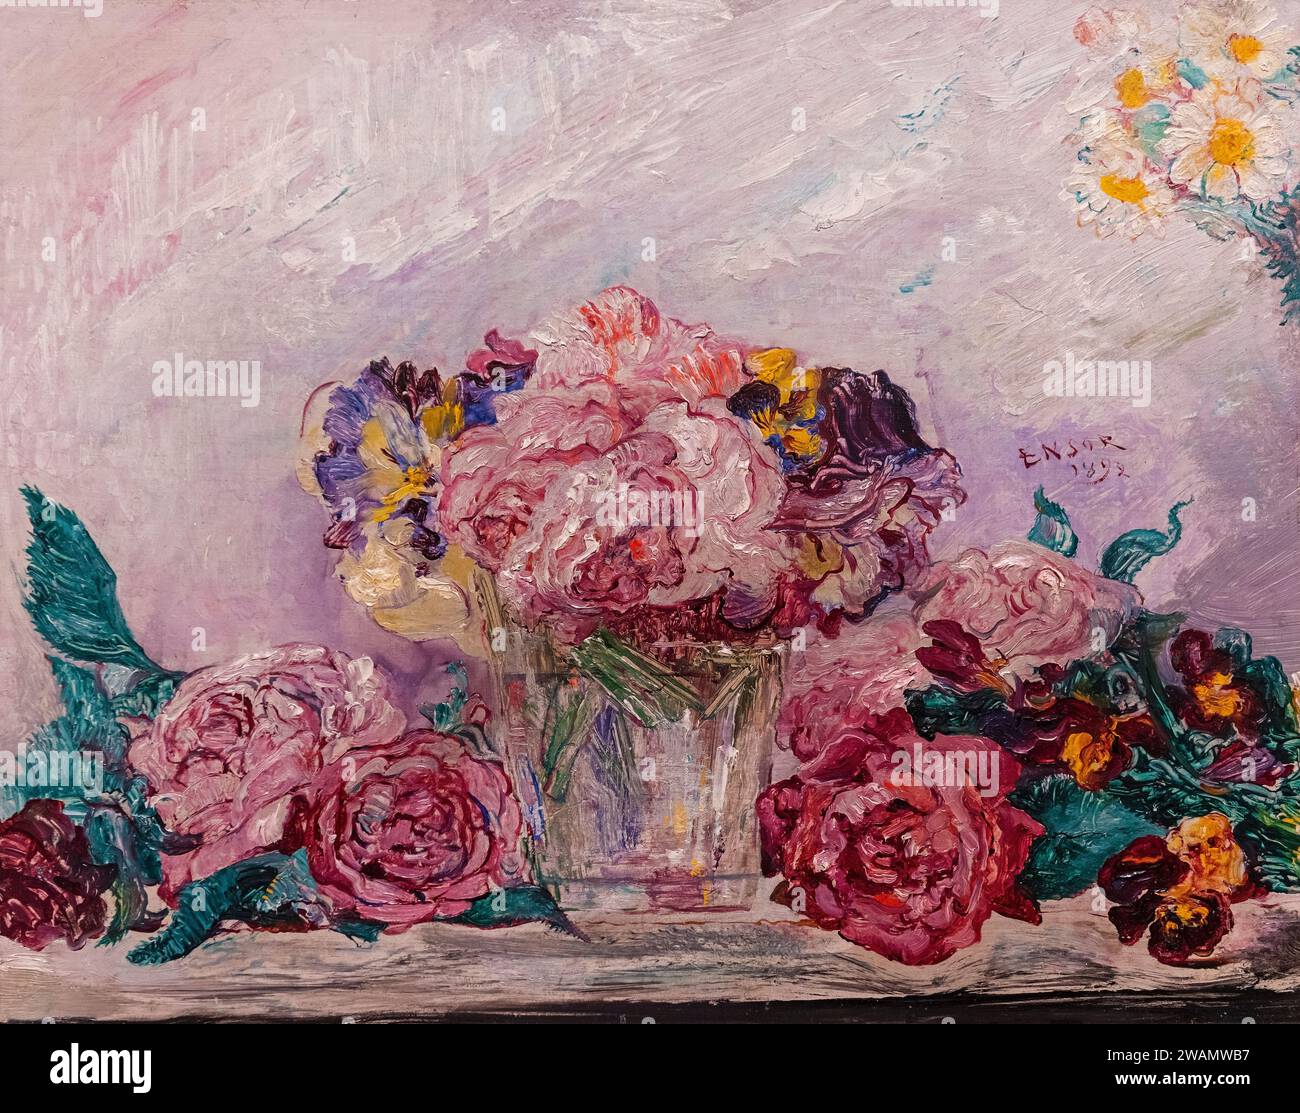 Roses, still life painting by James Ensor, 1892, Oostende, Belgium. Stock Photo